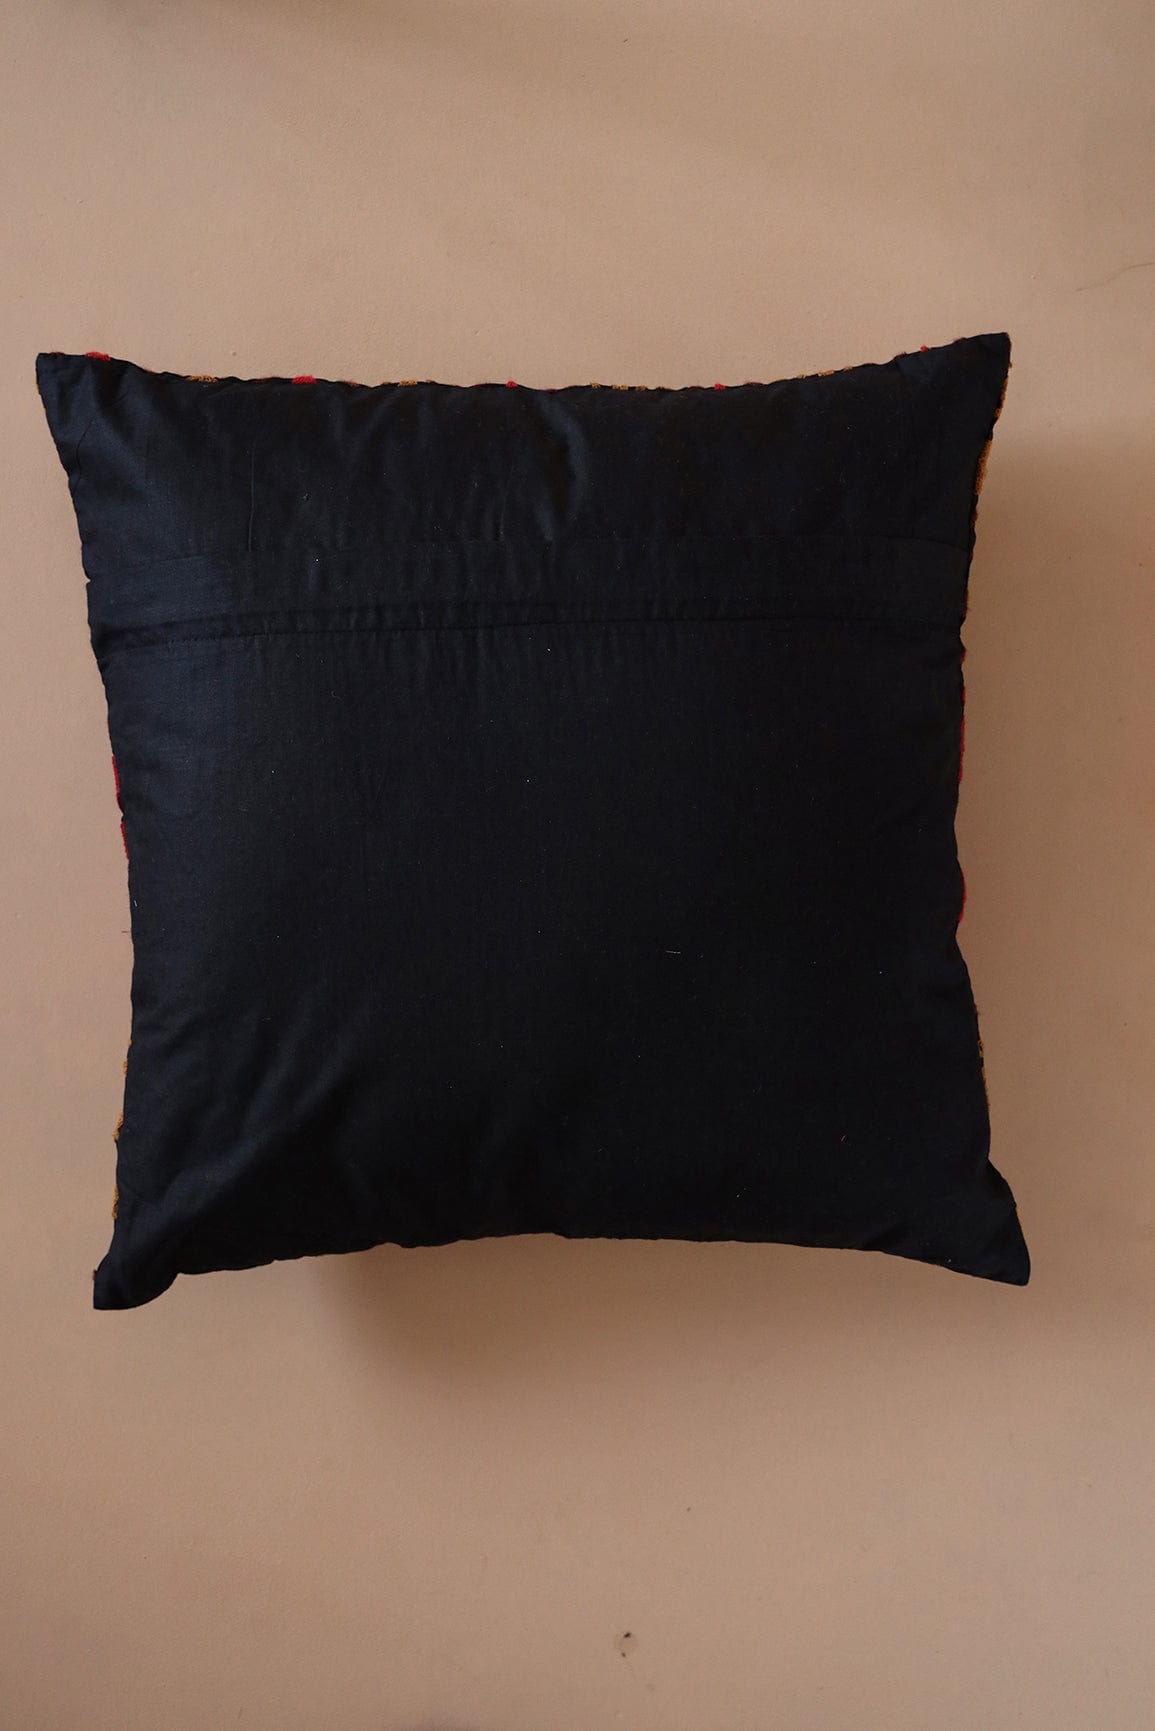 doeraa Heavy Artistic Embroidery on Black cotton Cushion Cover (16*16 inches)